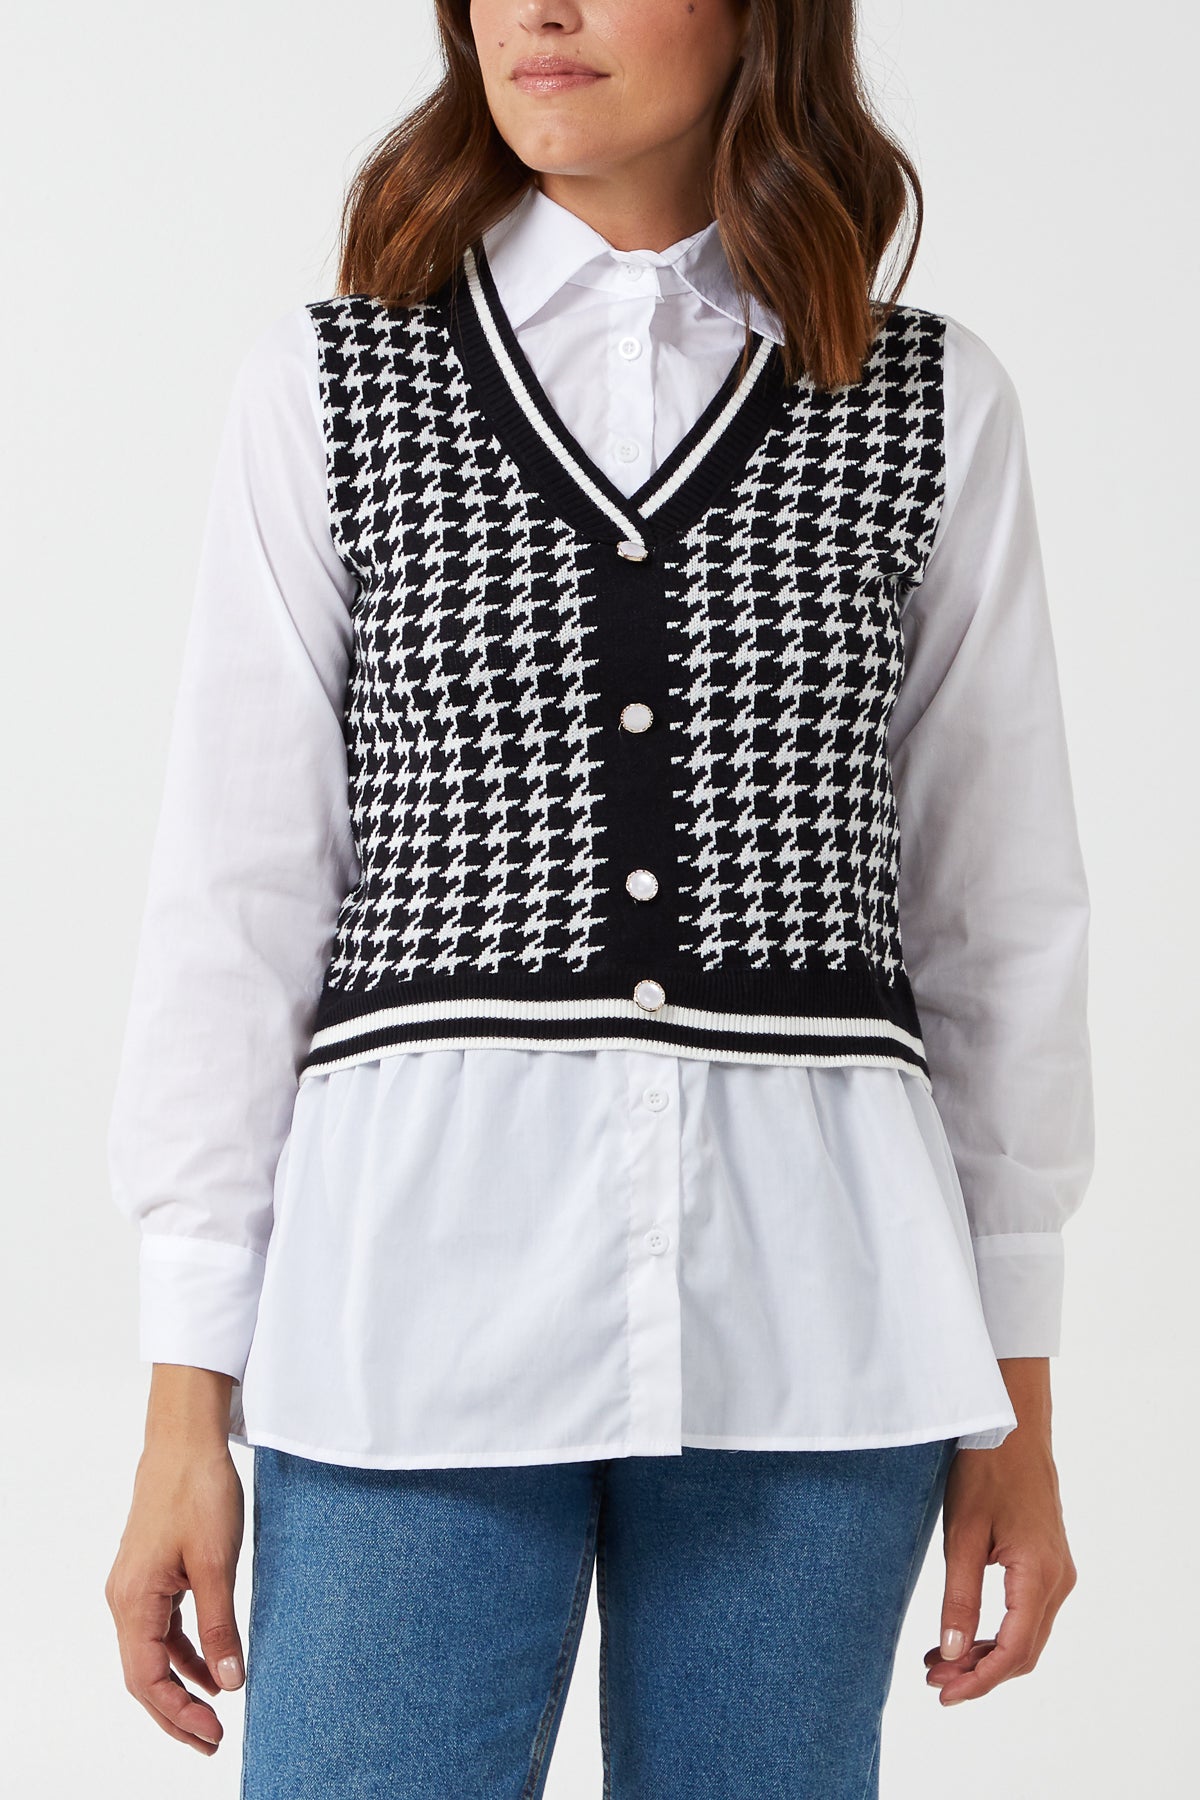 Houndstooth Buttoned Vest With Undershirt